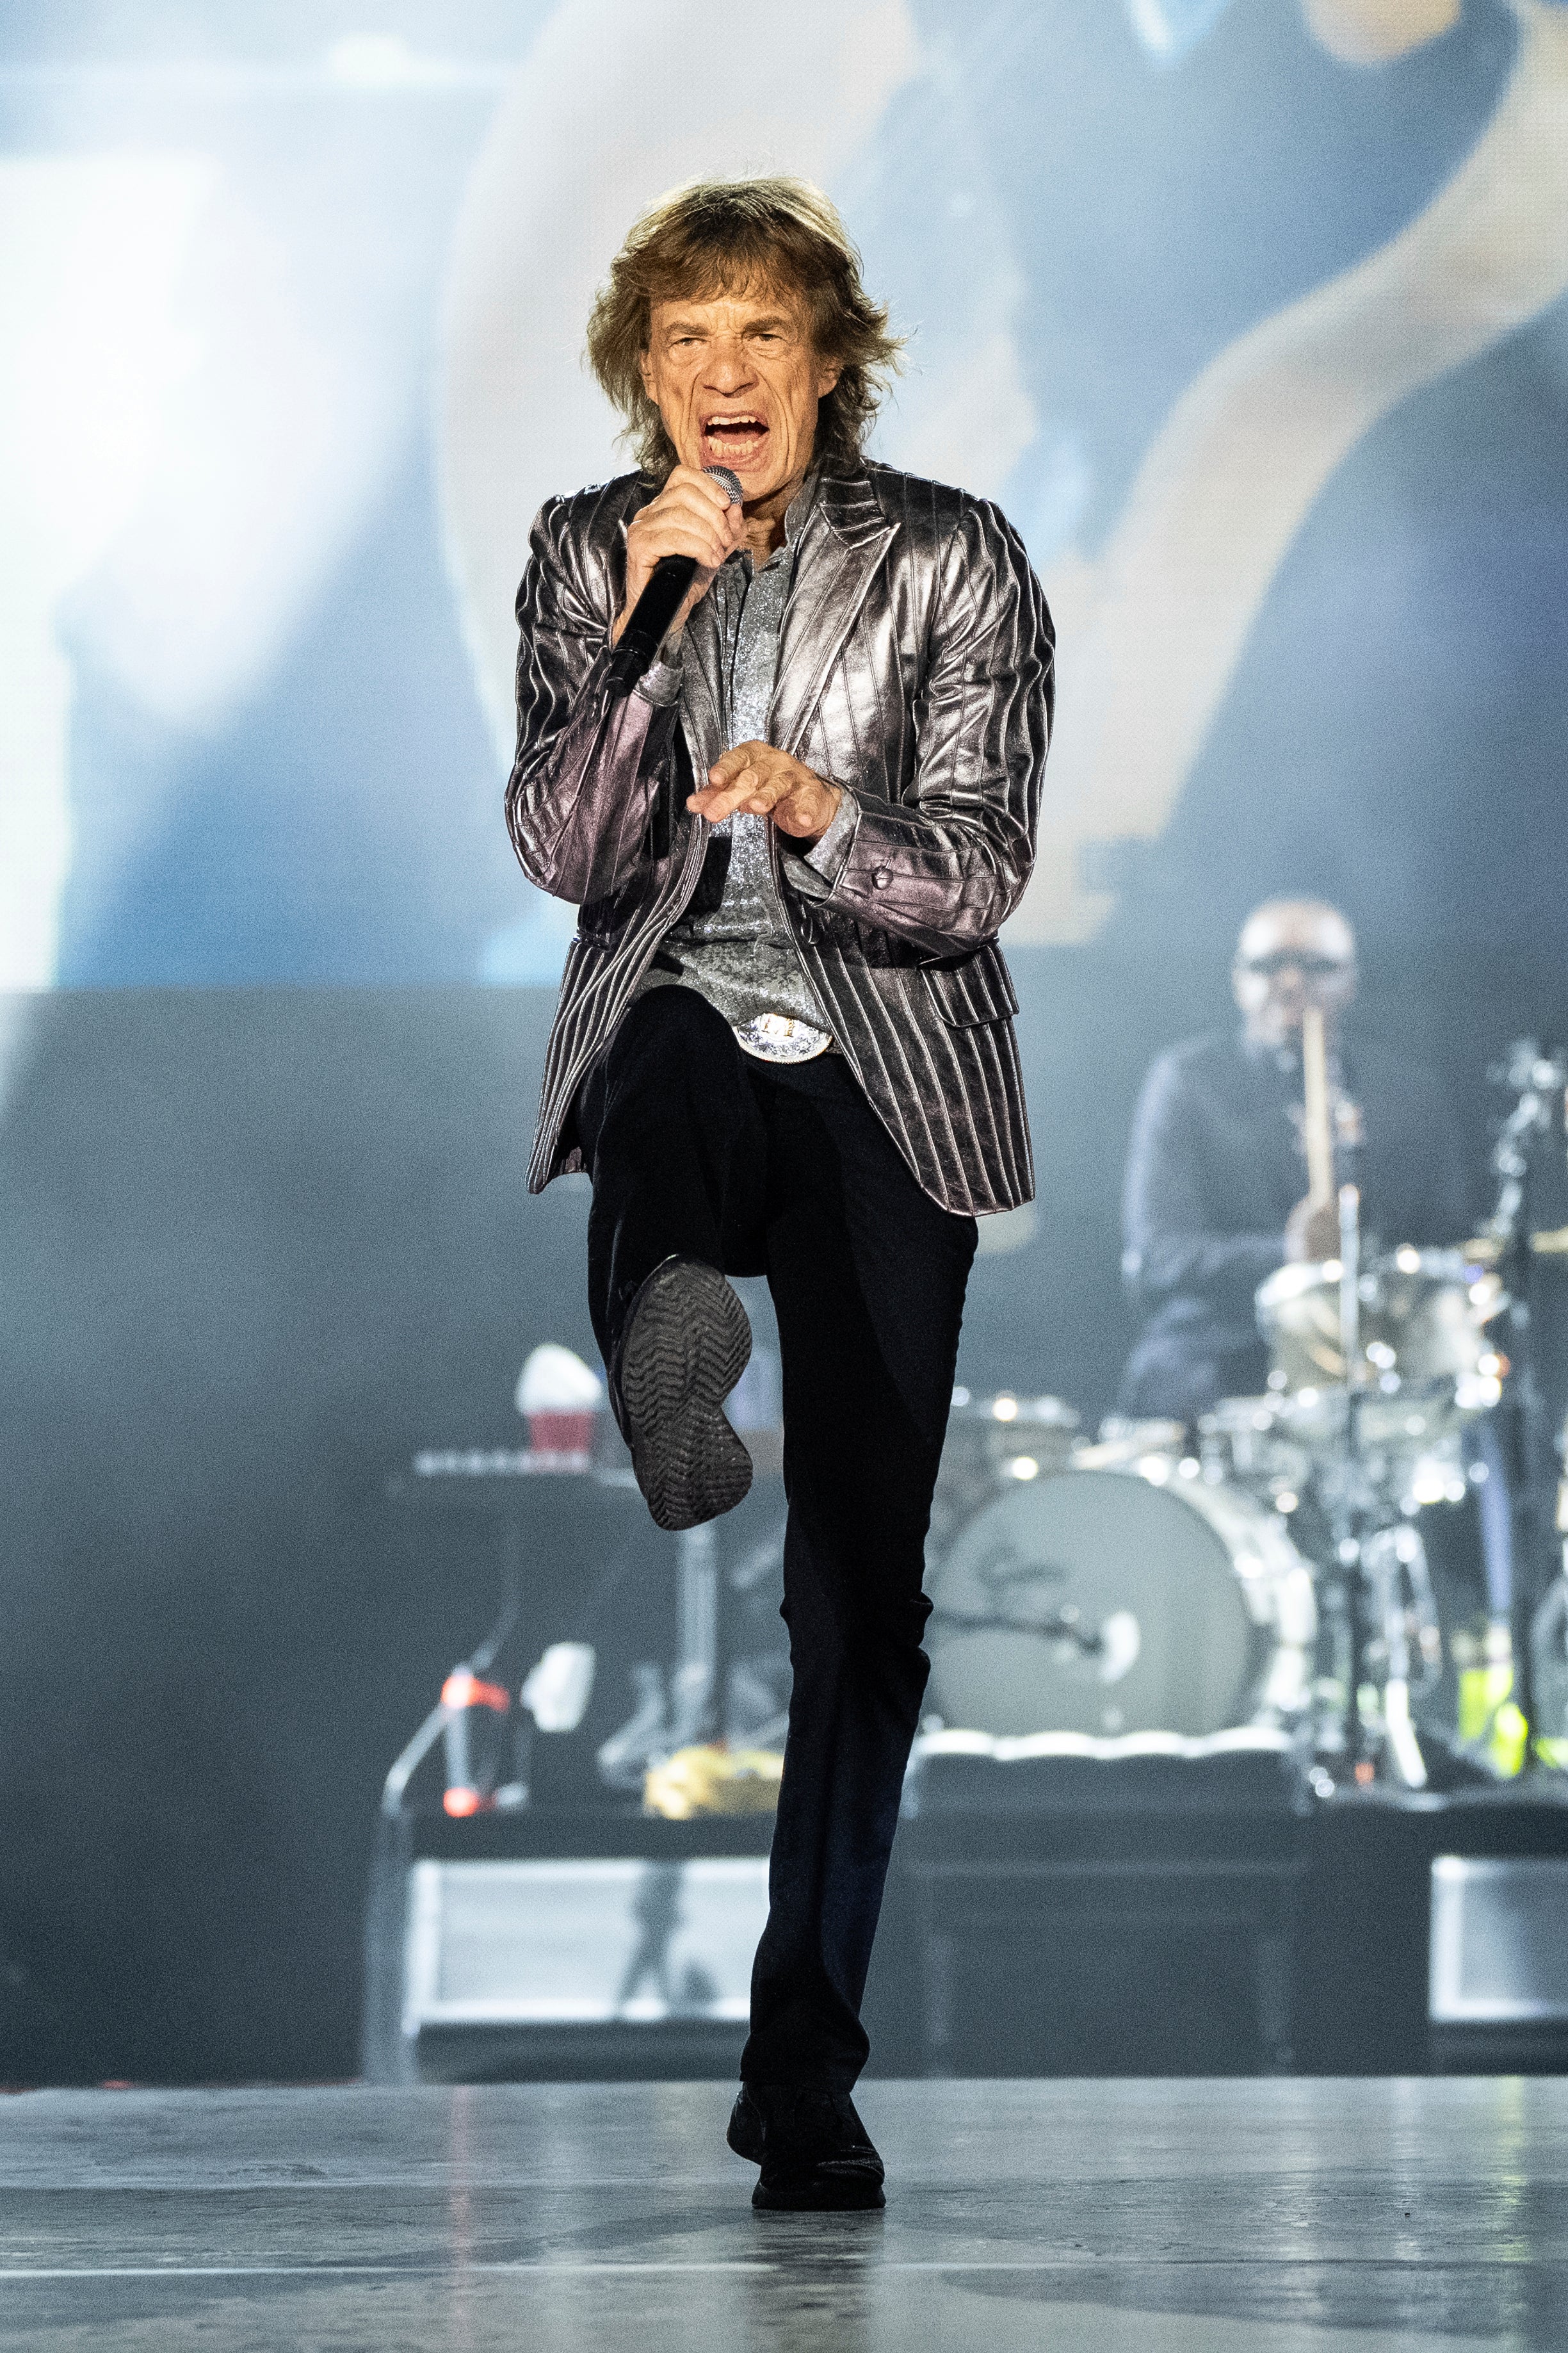 start ’em up! rolling stones kick off their us tour with vibrant two-hour show in houston